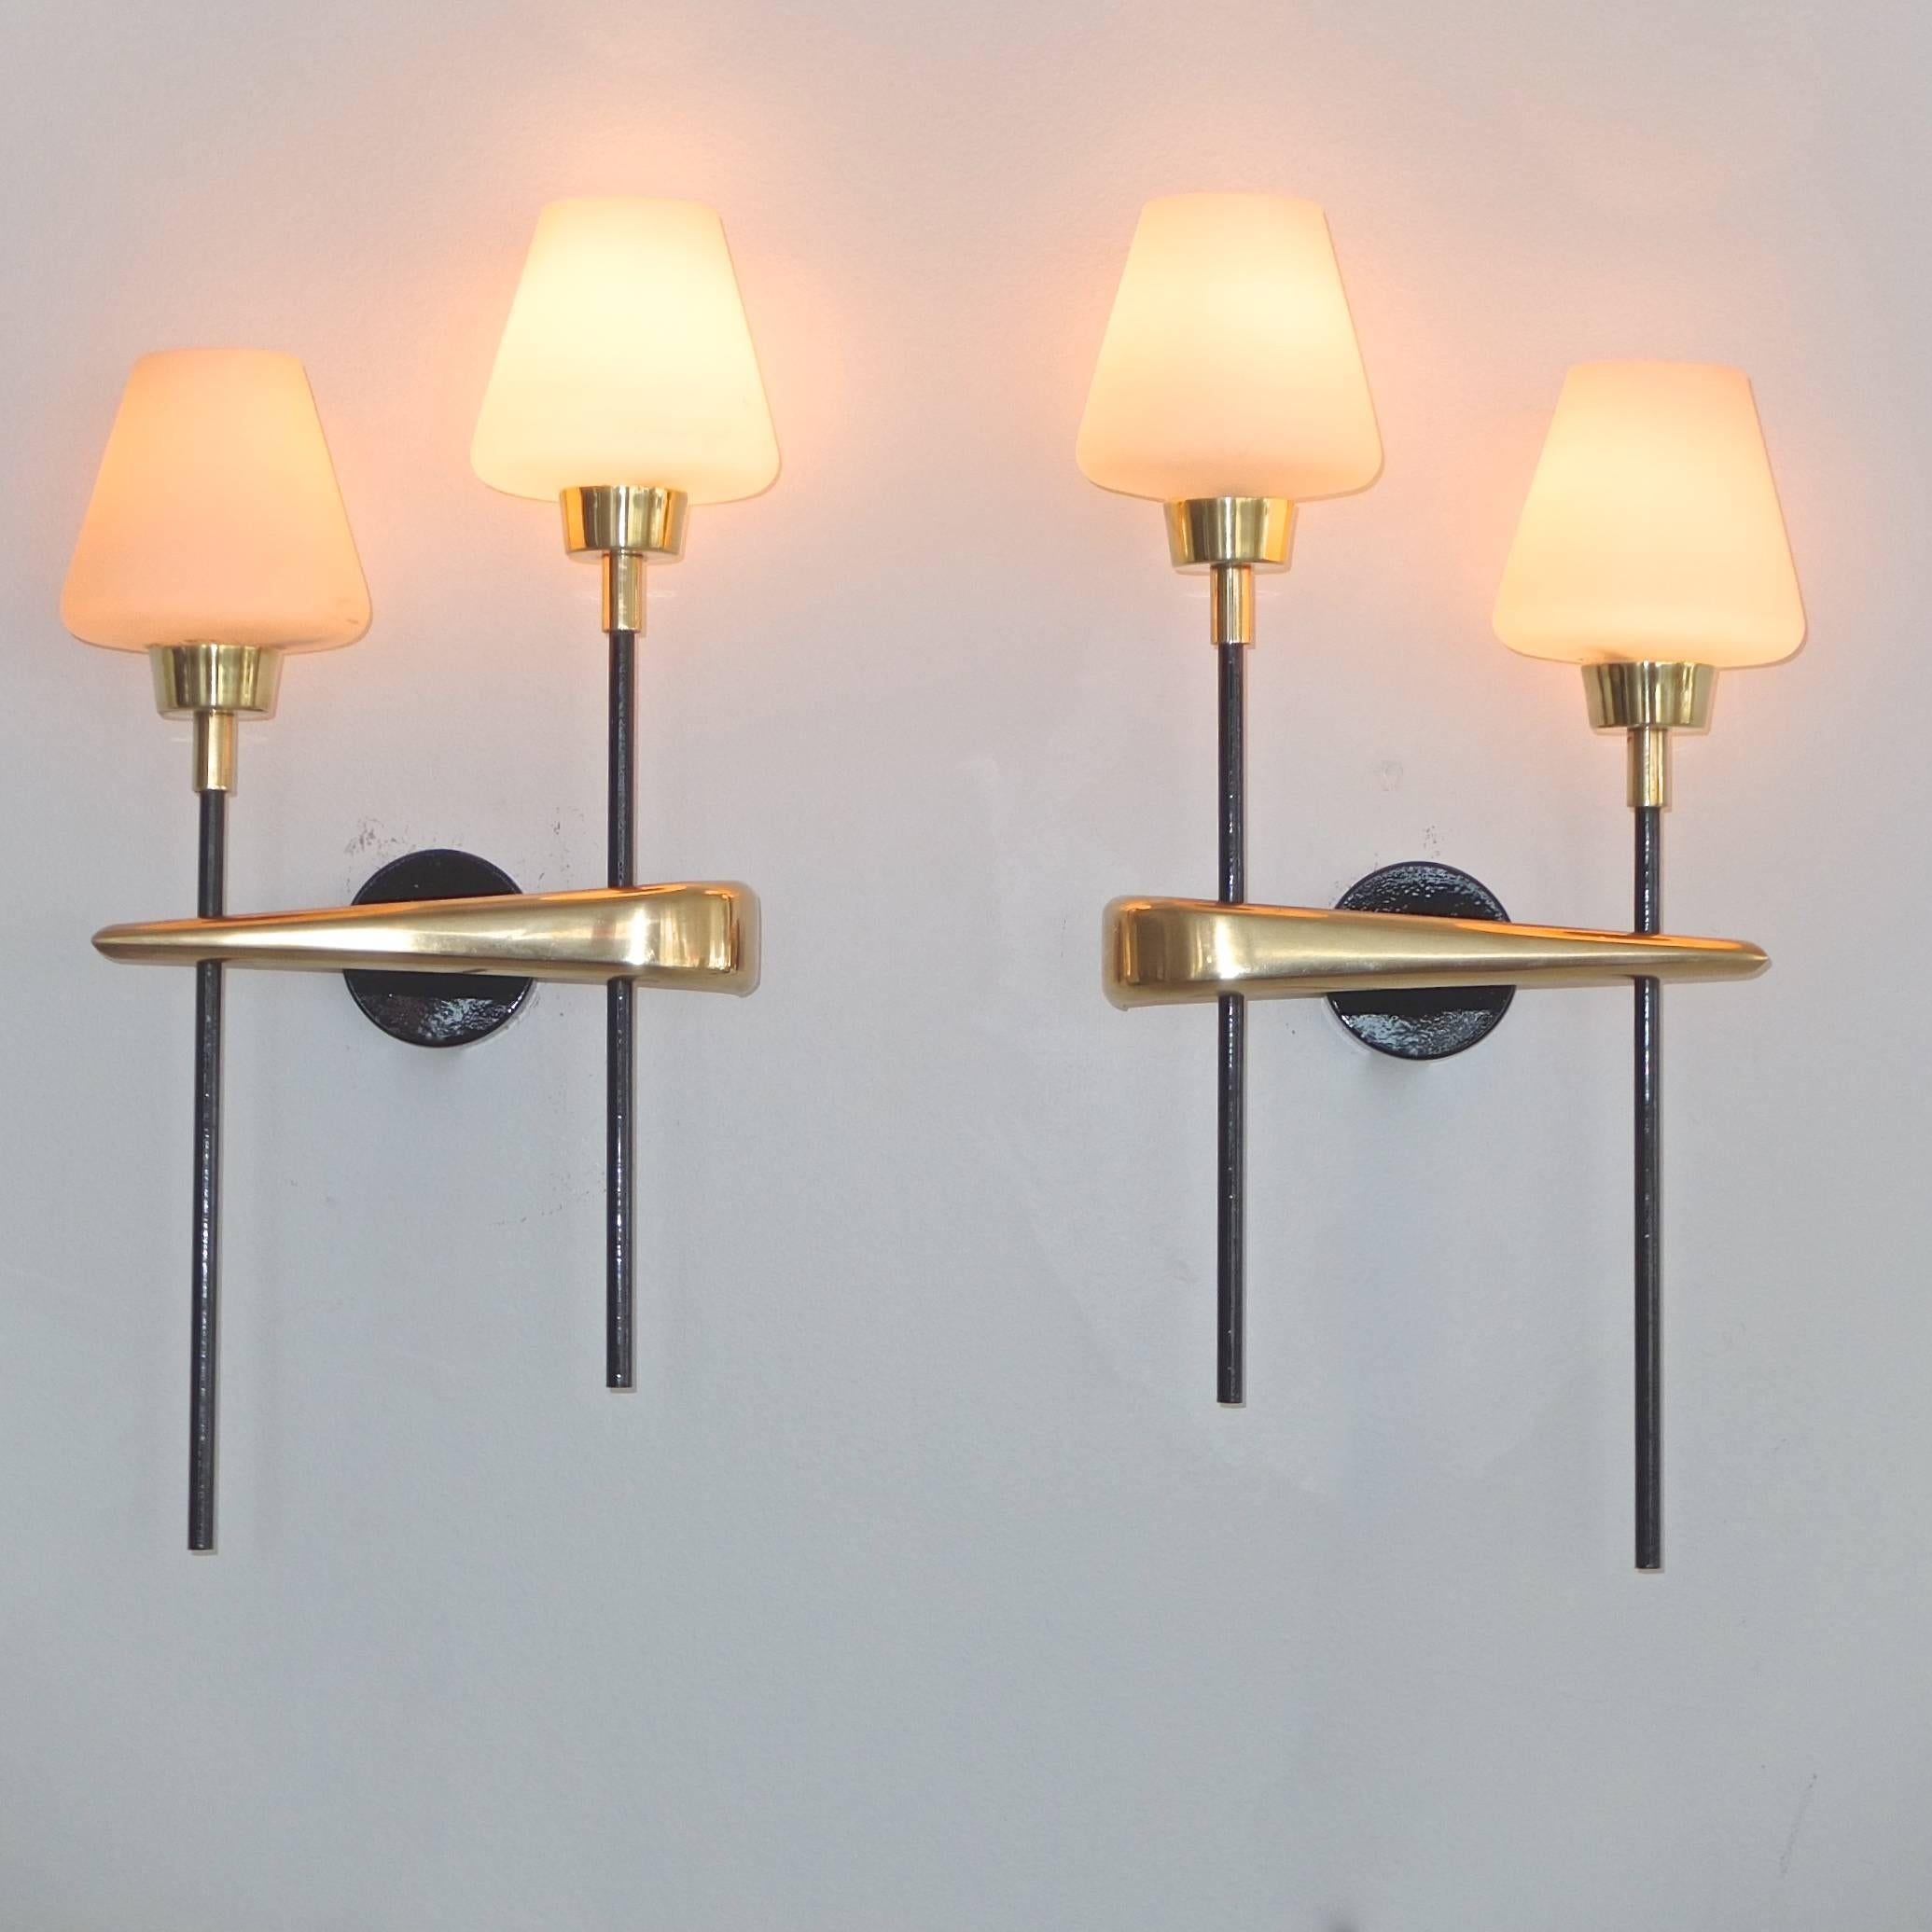 
Pair of French, 1950s wall-mounted sconces from Maison Arlus each with two upright lights (ascending and descending like musical notes). Each light has a single candelabra socket and a satin white opaline cased glass conical shade. Very heavy and